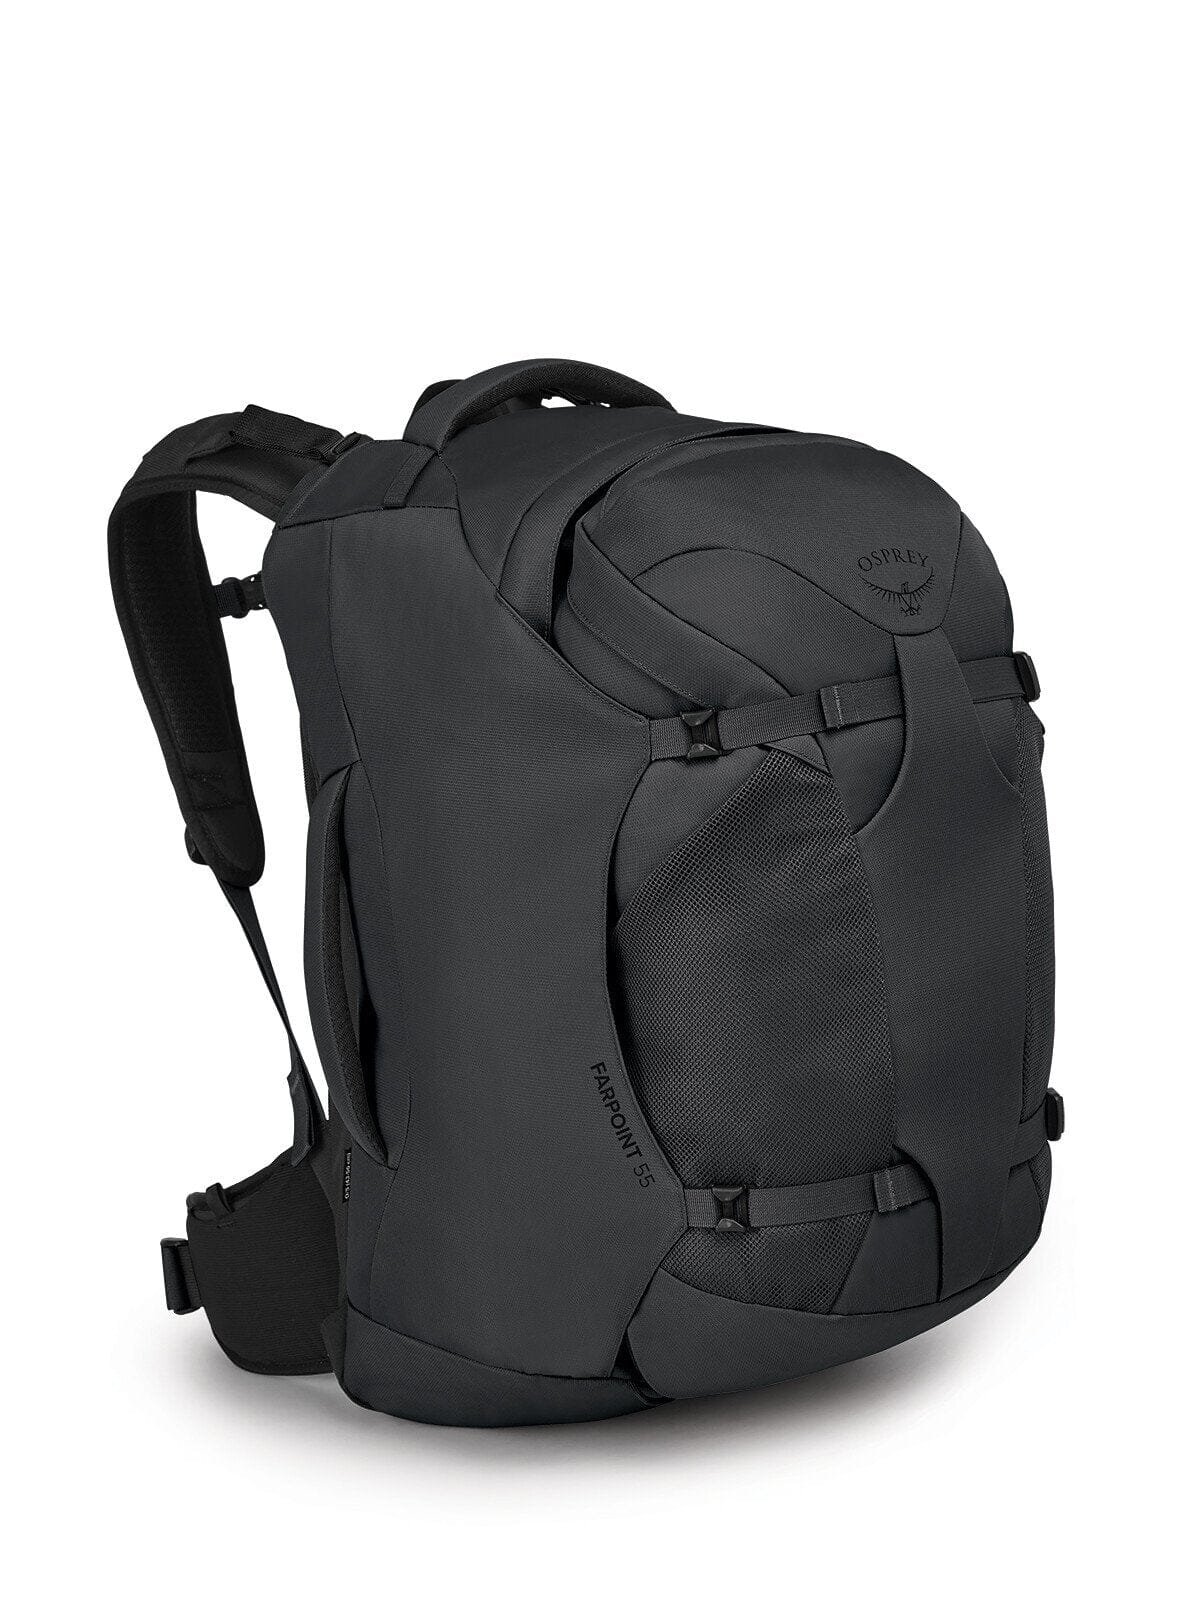 Osprey Farpoint 55 Travel Pack Tunnel Vision Grey 